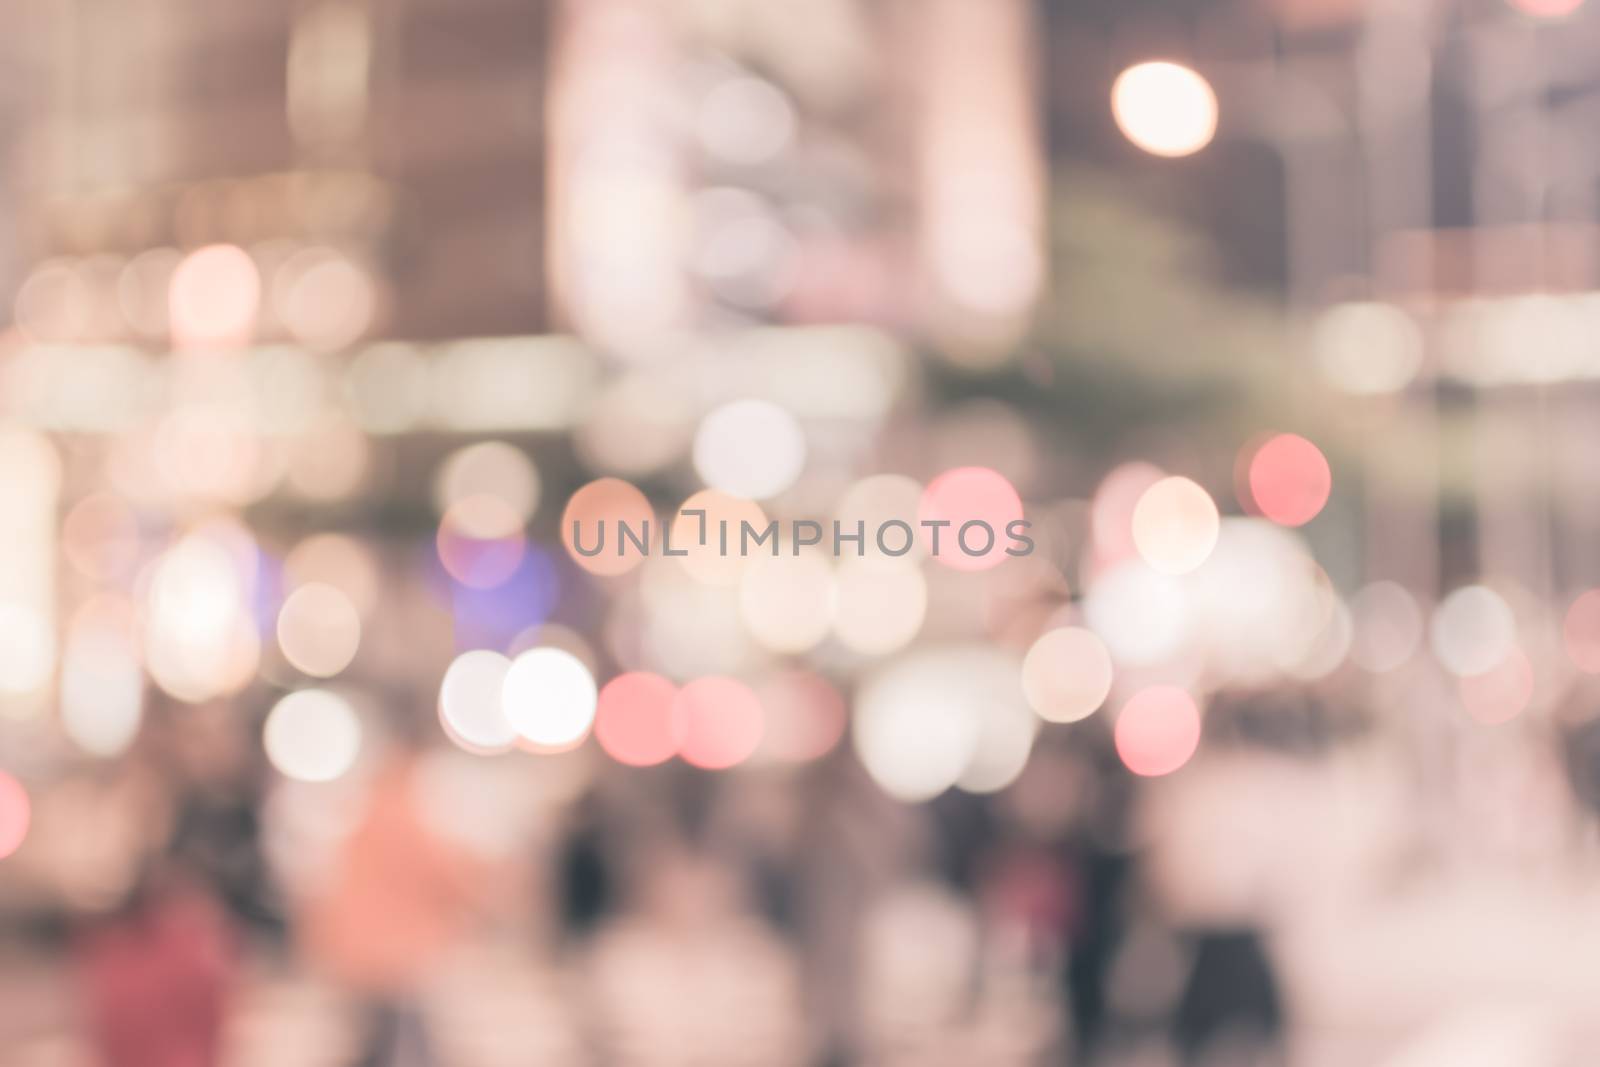 Abstract urban background with blurred buildings and street, shallow depth of focus.